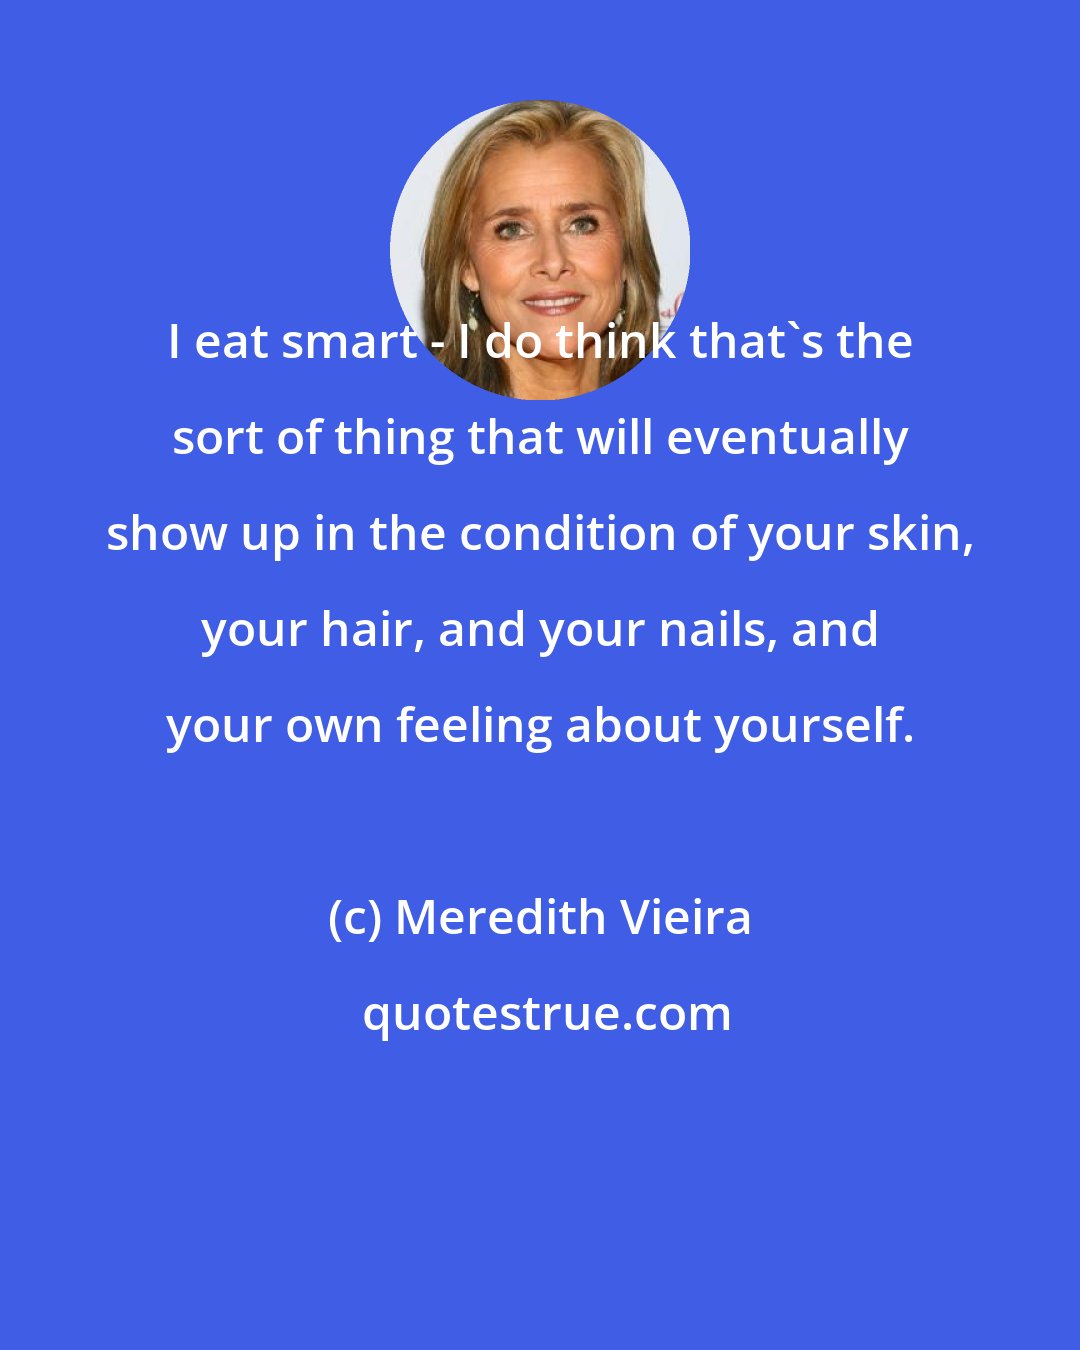 Meredith Vieira: I eat smart - I do think that's the sort of thing that will eventually show up in the condition of your skin, your hair, and your nails, and your own feeling about yourself.